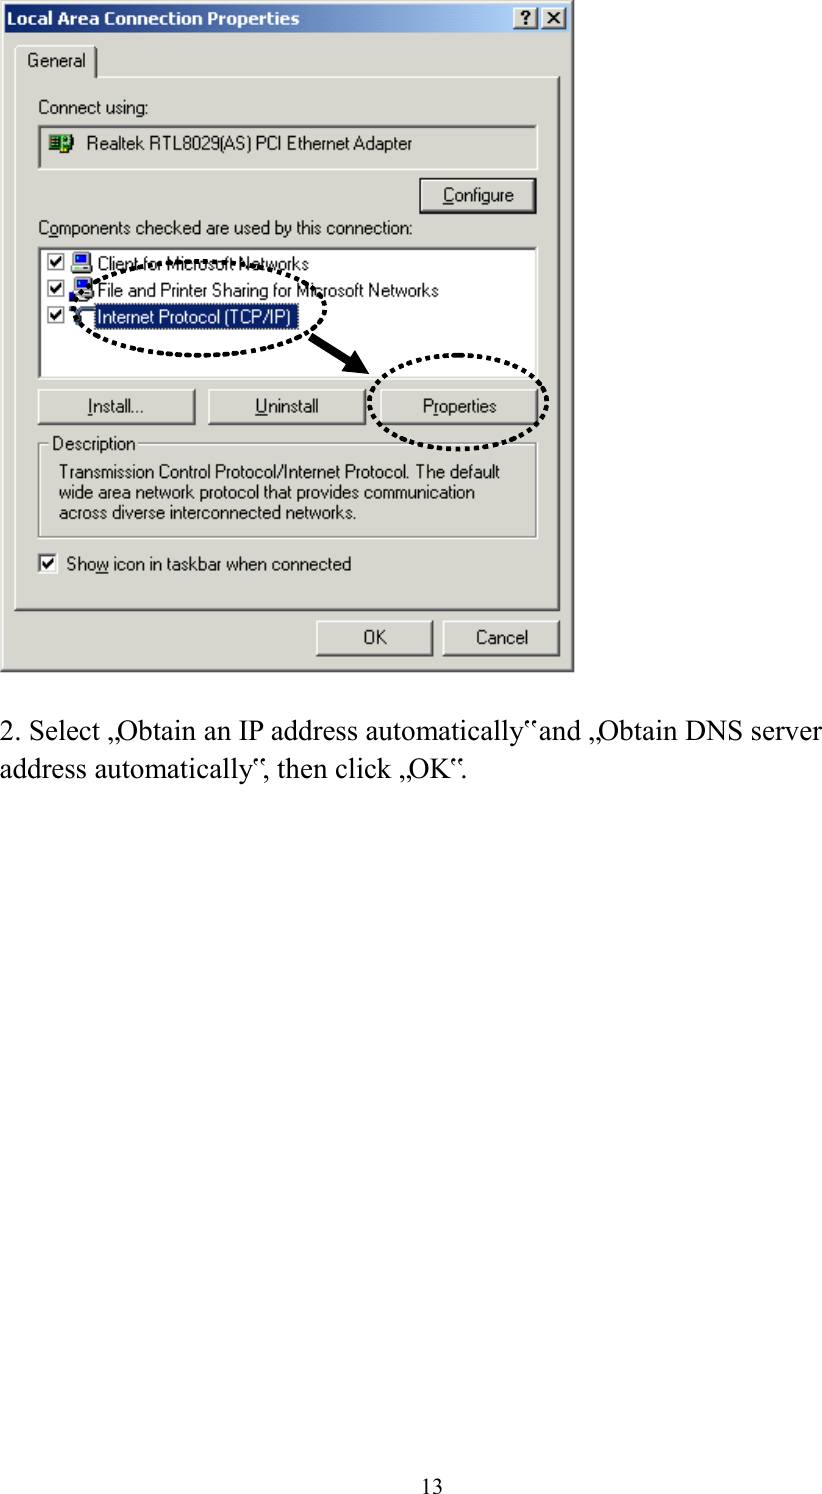  13   2. Select „Obtain an IP address automatically‟ and „Obtain DNS server address automatically‟, then click „OK‟.  